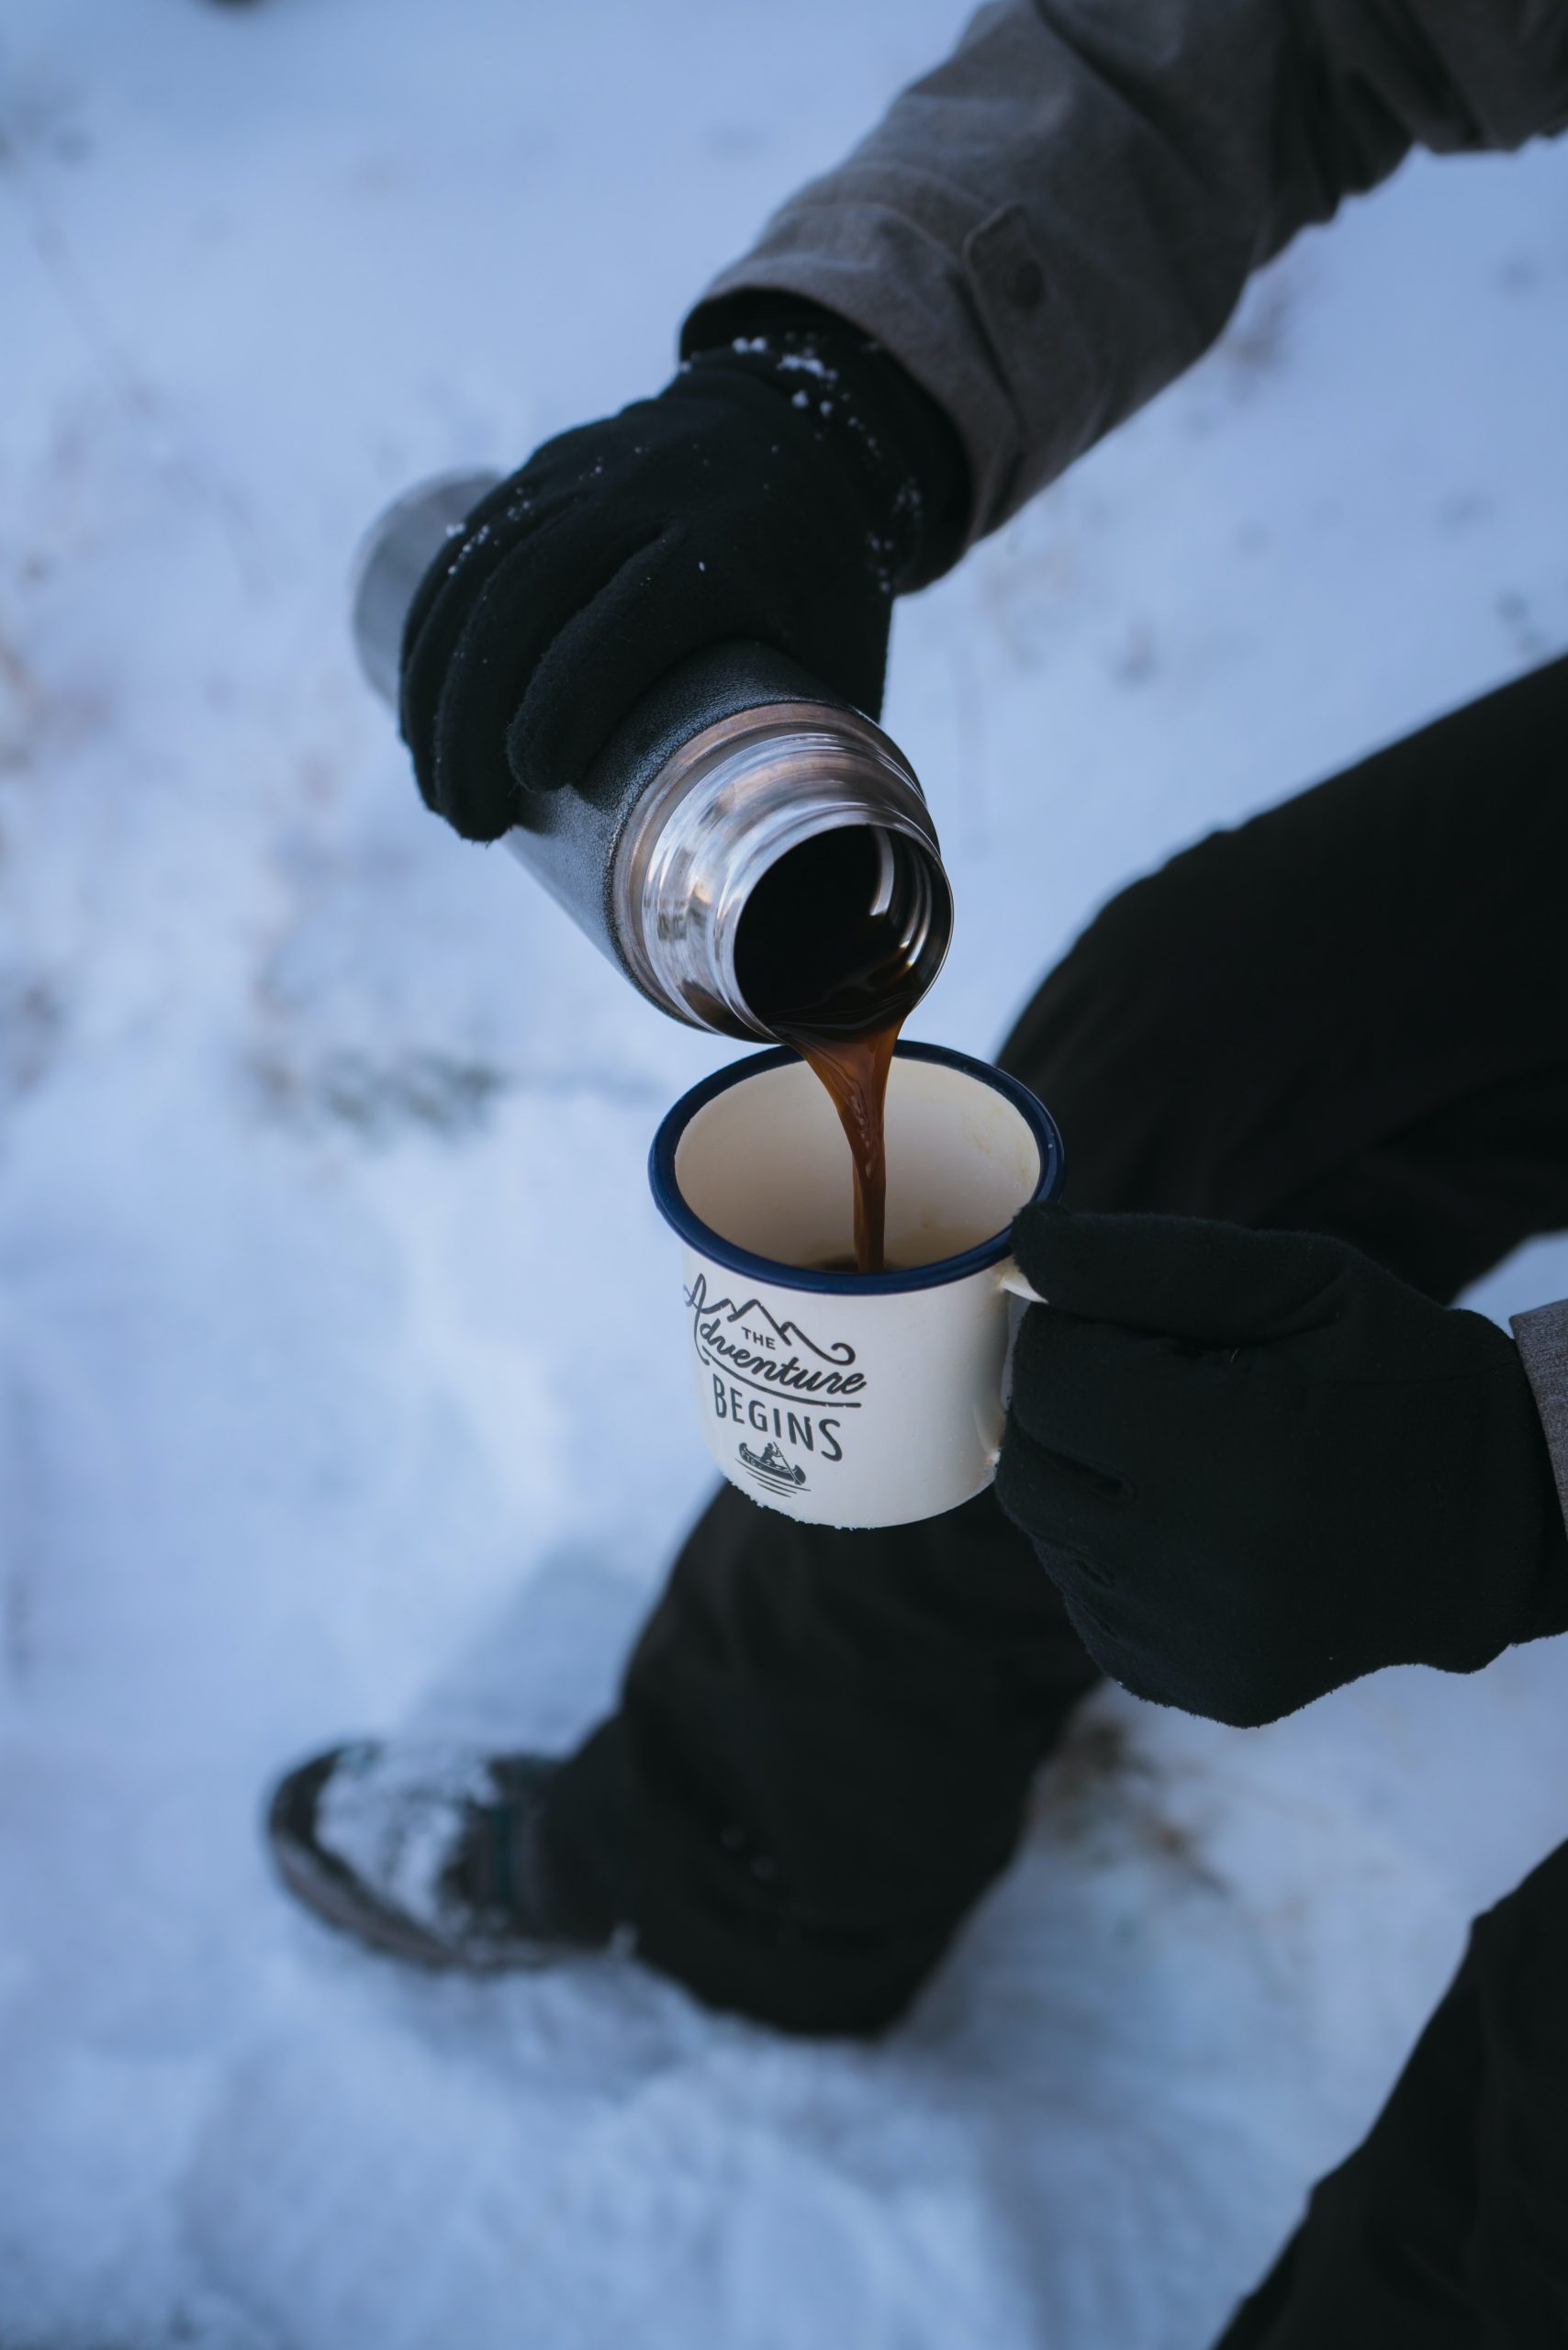 An individual wearing gloves pouring coffee into a coffee mug from an insulated bottle.